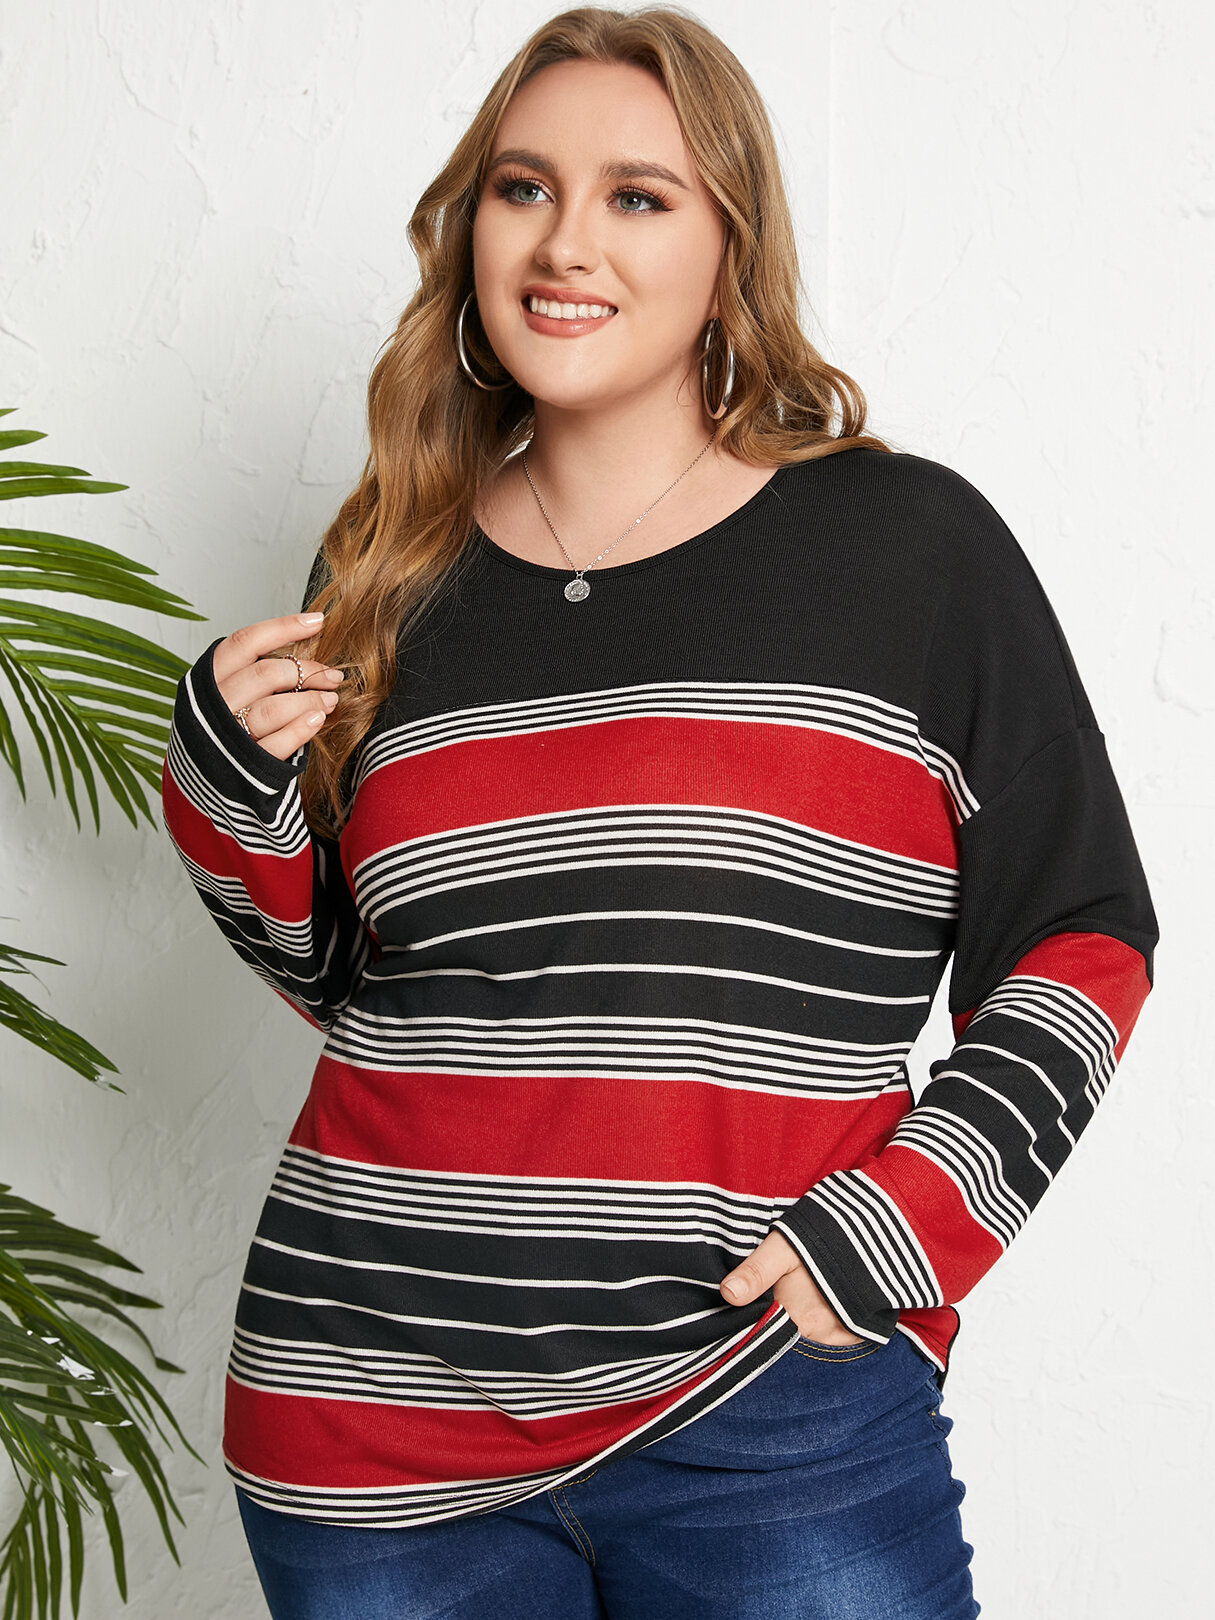 Plus Size Crew Neck Striped Long Sleeves Tee